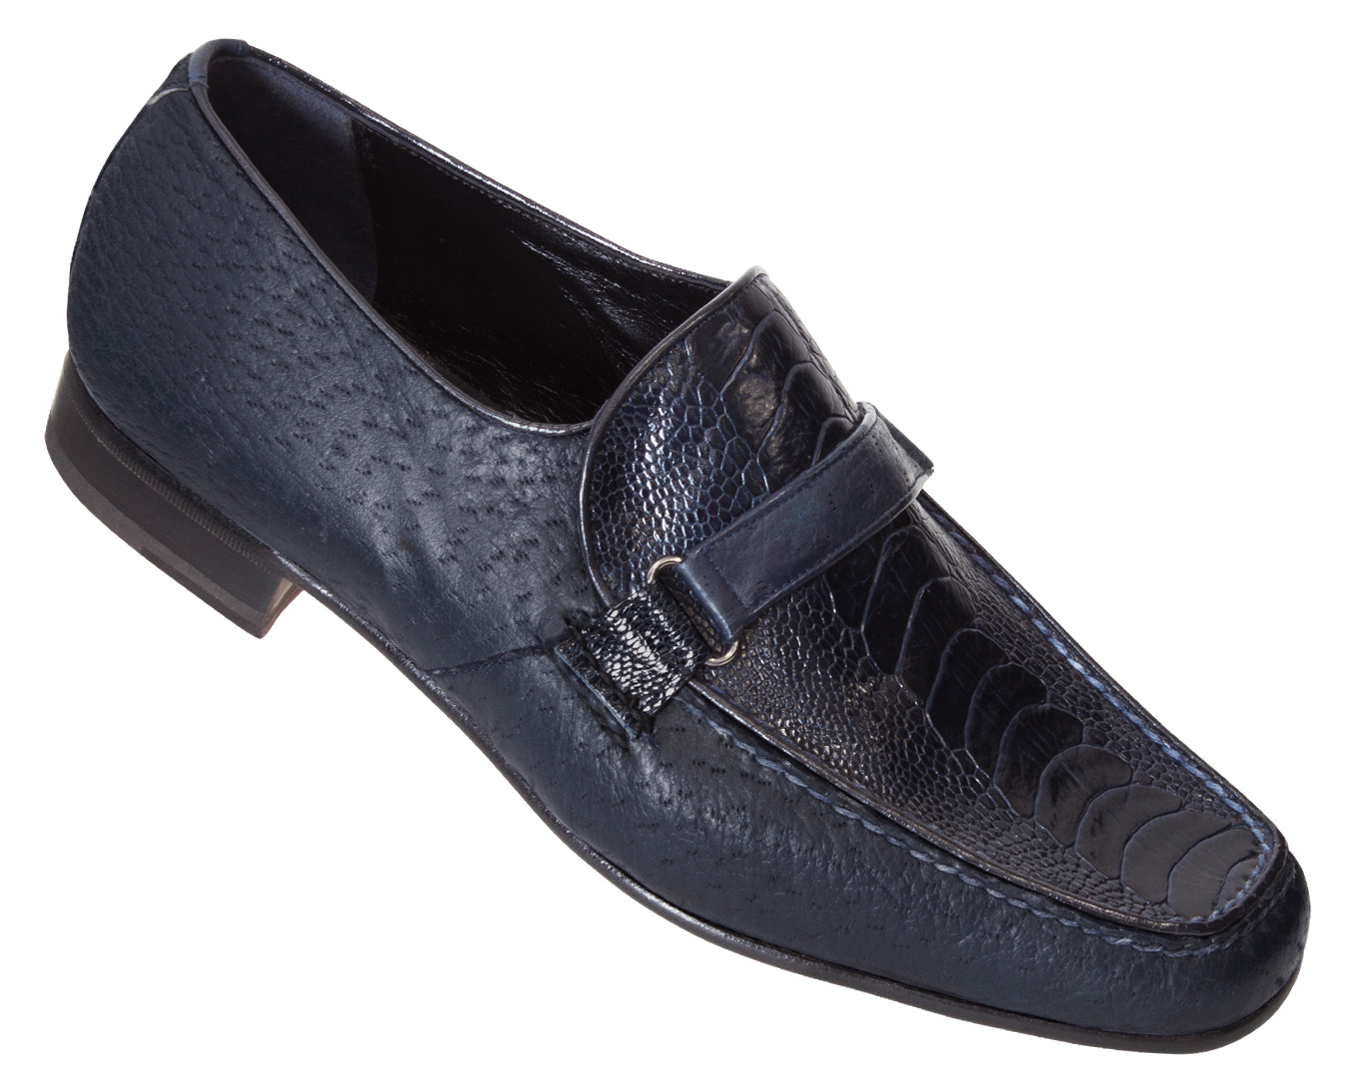 Mauri "3733" Wonder Blue Genuine Pecary / Ostrich Leg Loafer Shoes With Horsebit